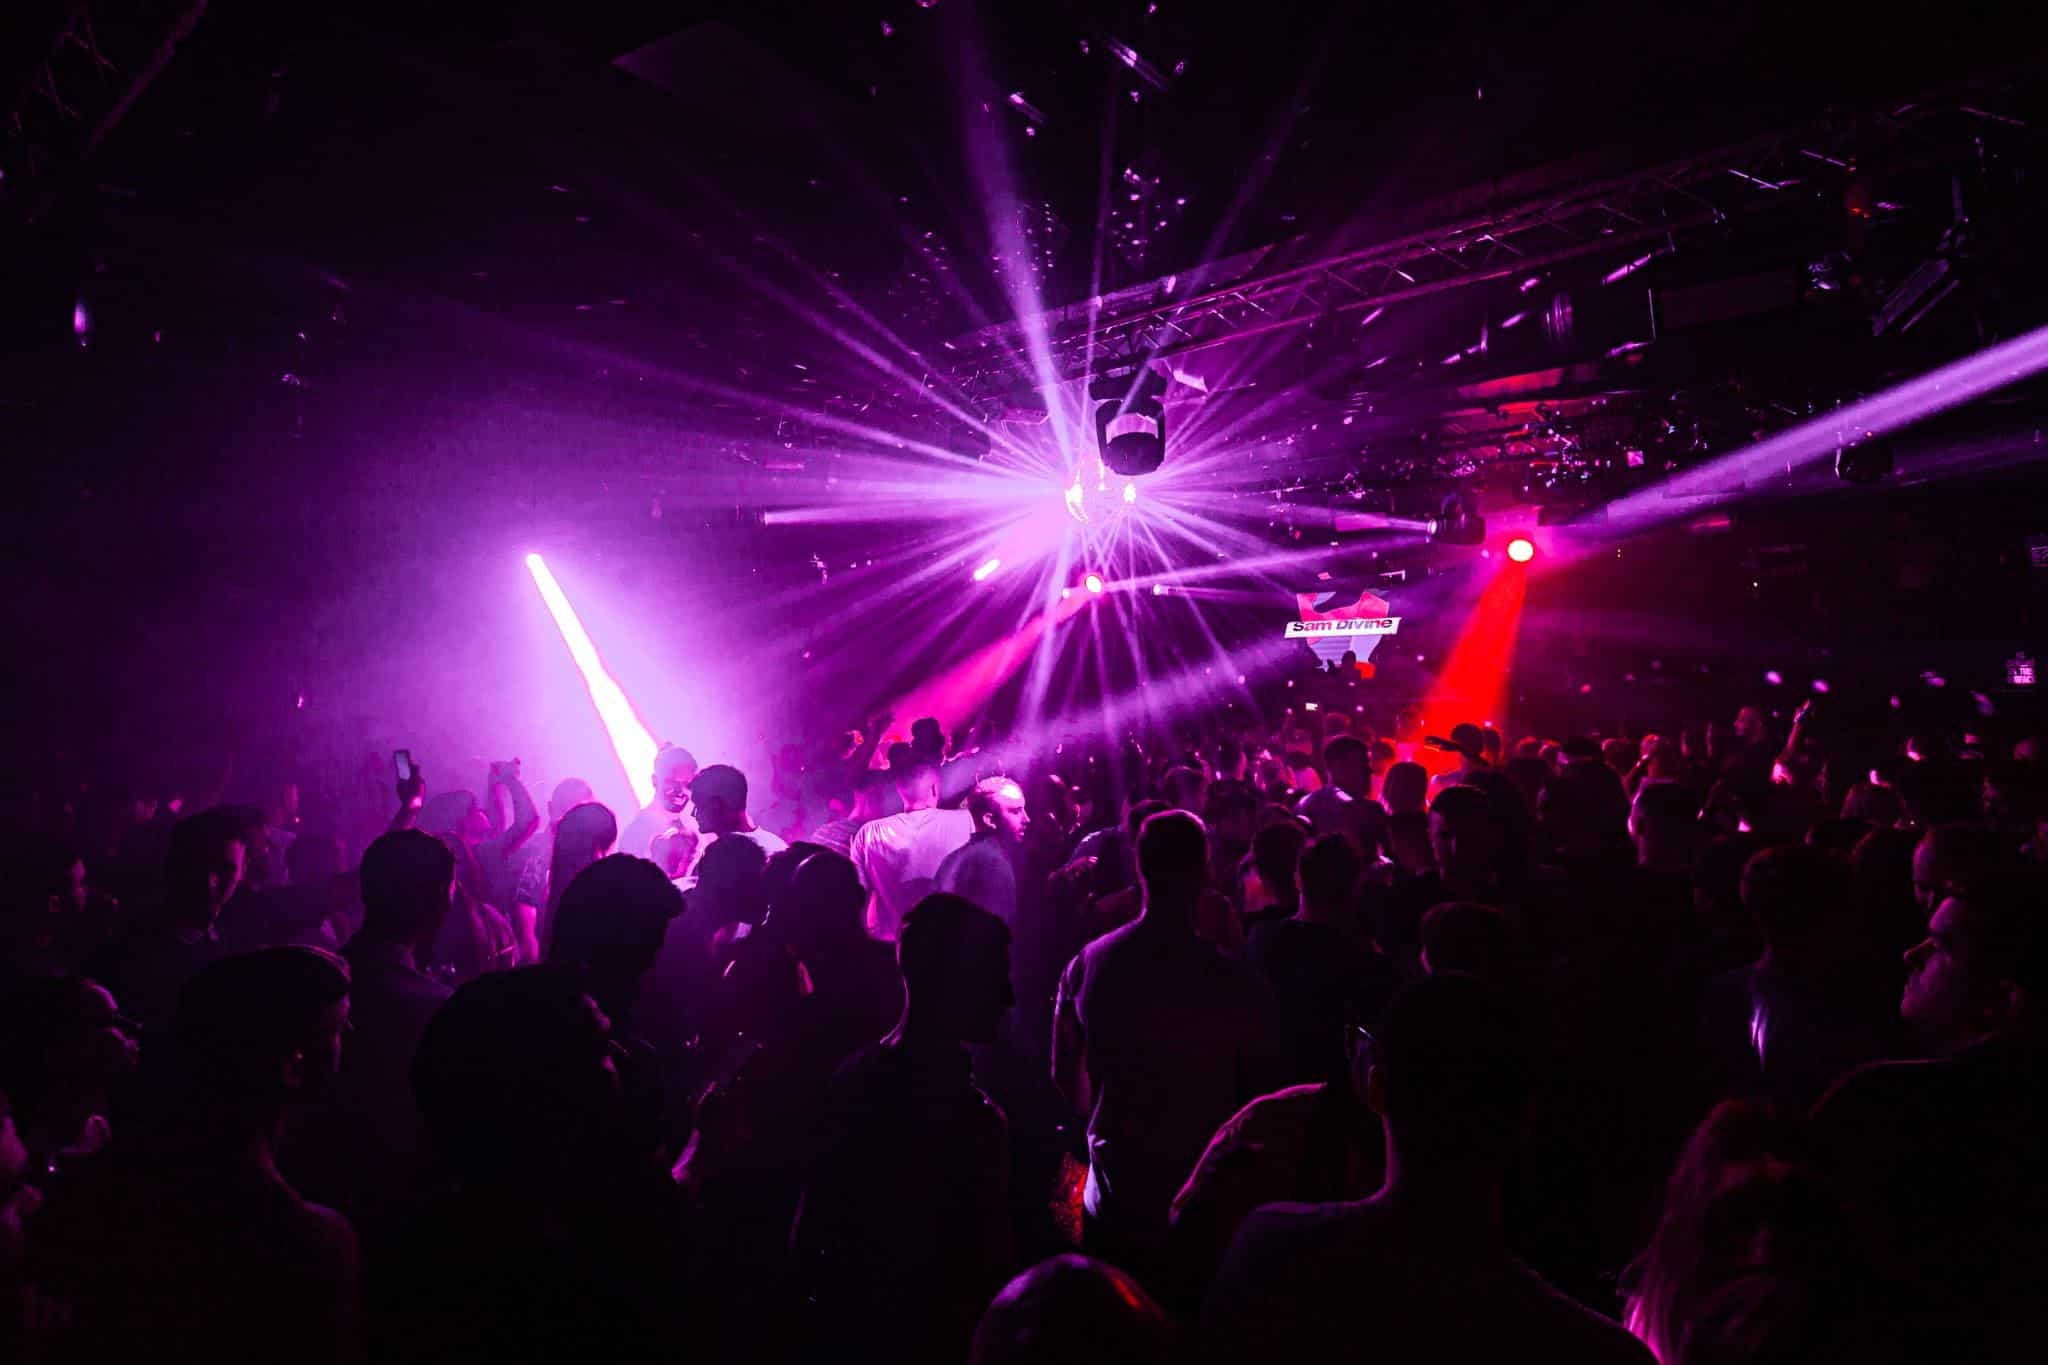 Ministry of Sound celebrates their 30th Anniversary